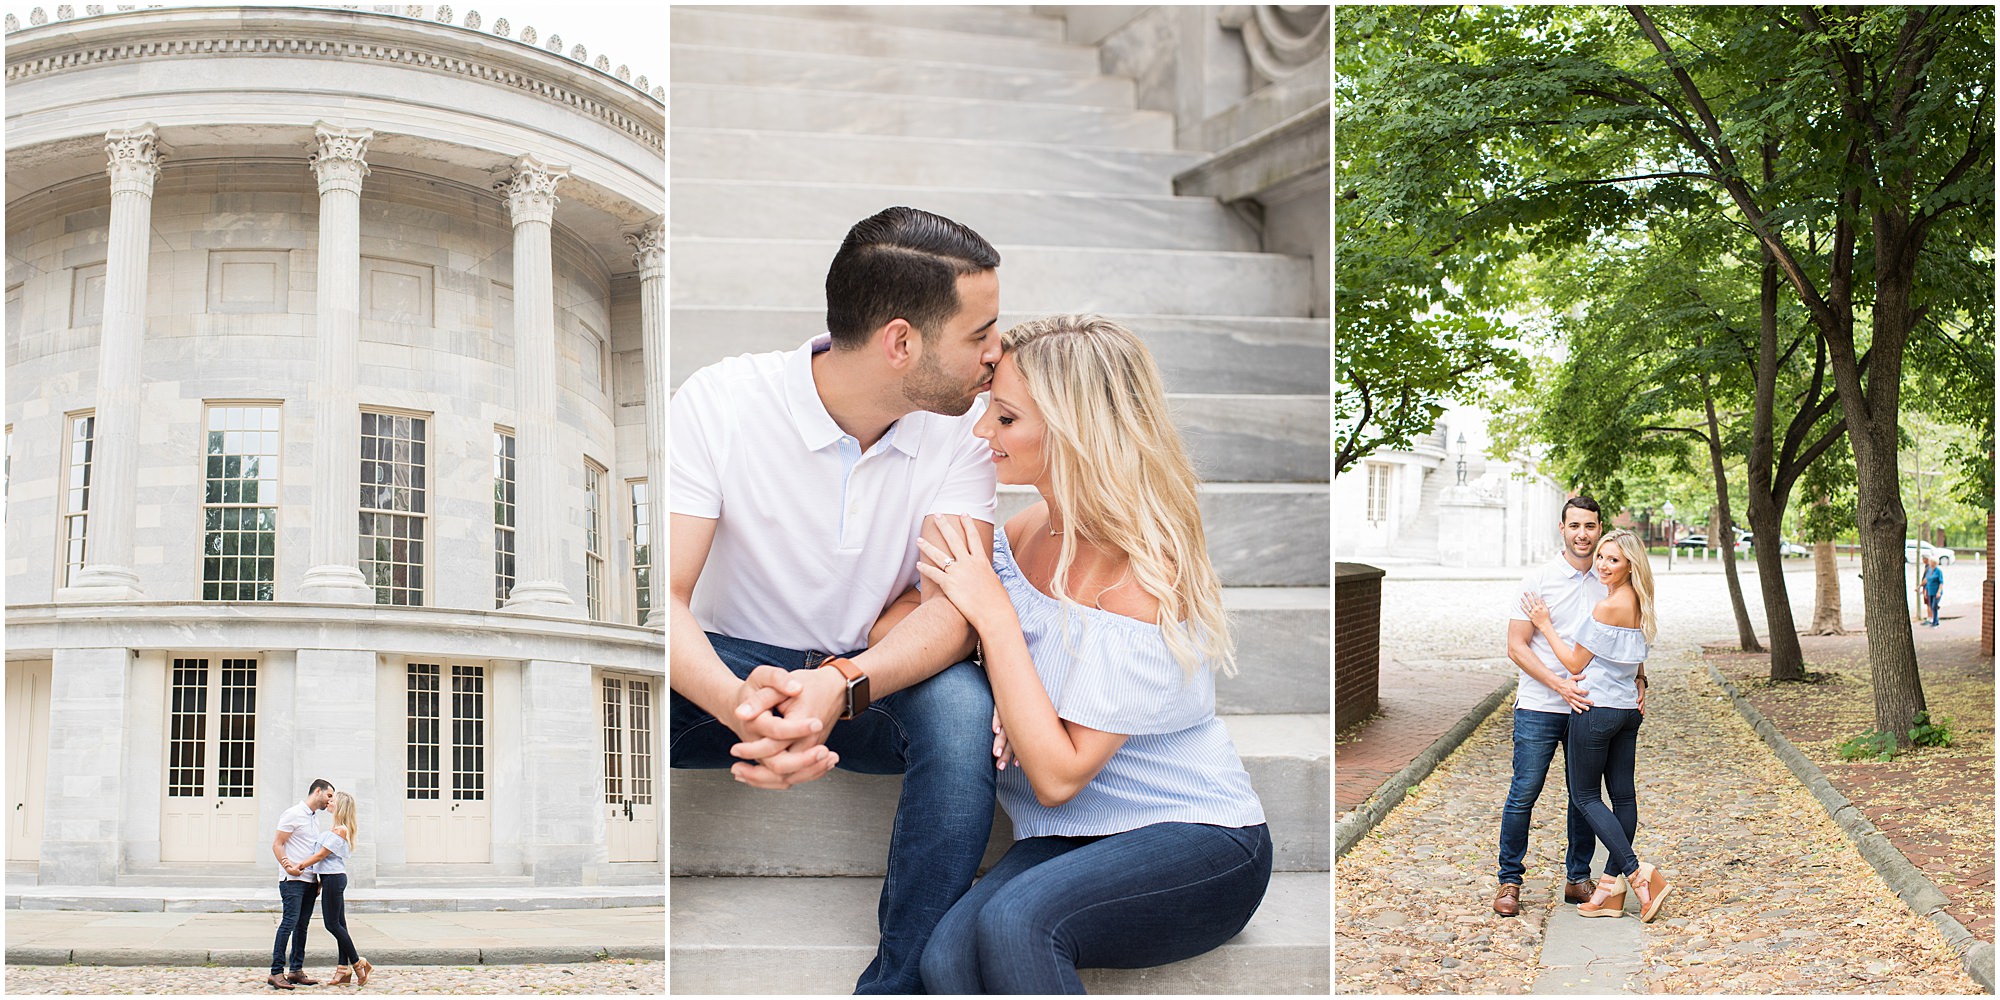 The Merchant Exchange Building in Philadelphia is a great location for a Philly engagement session.